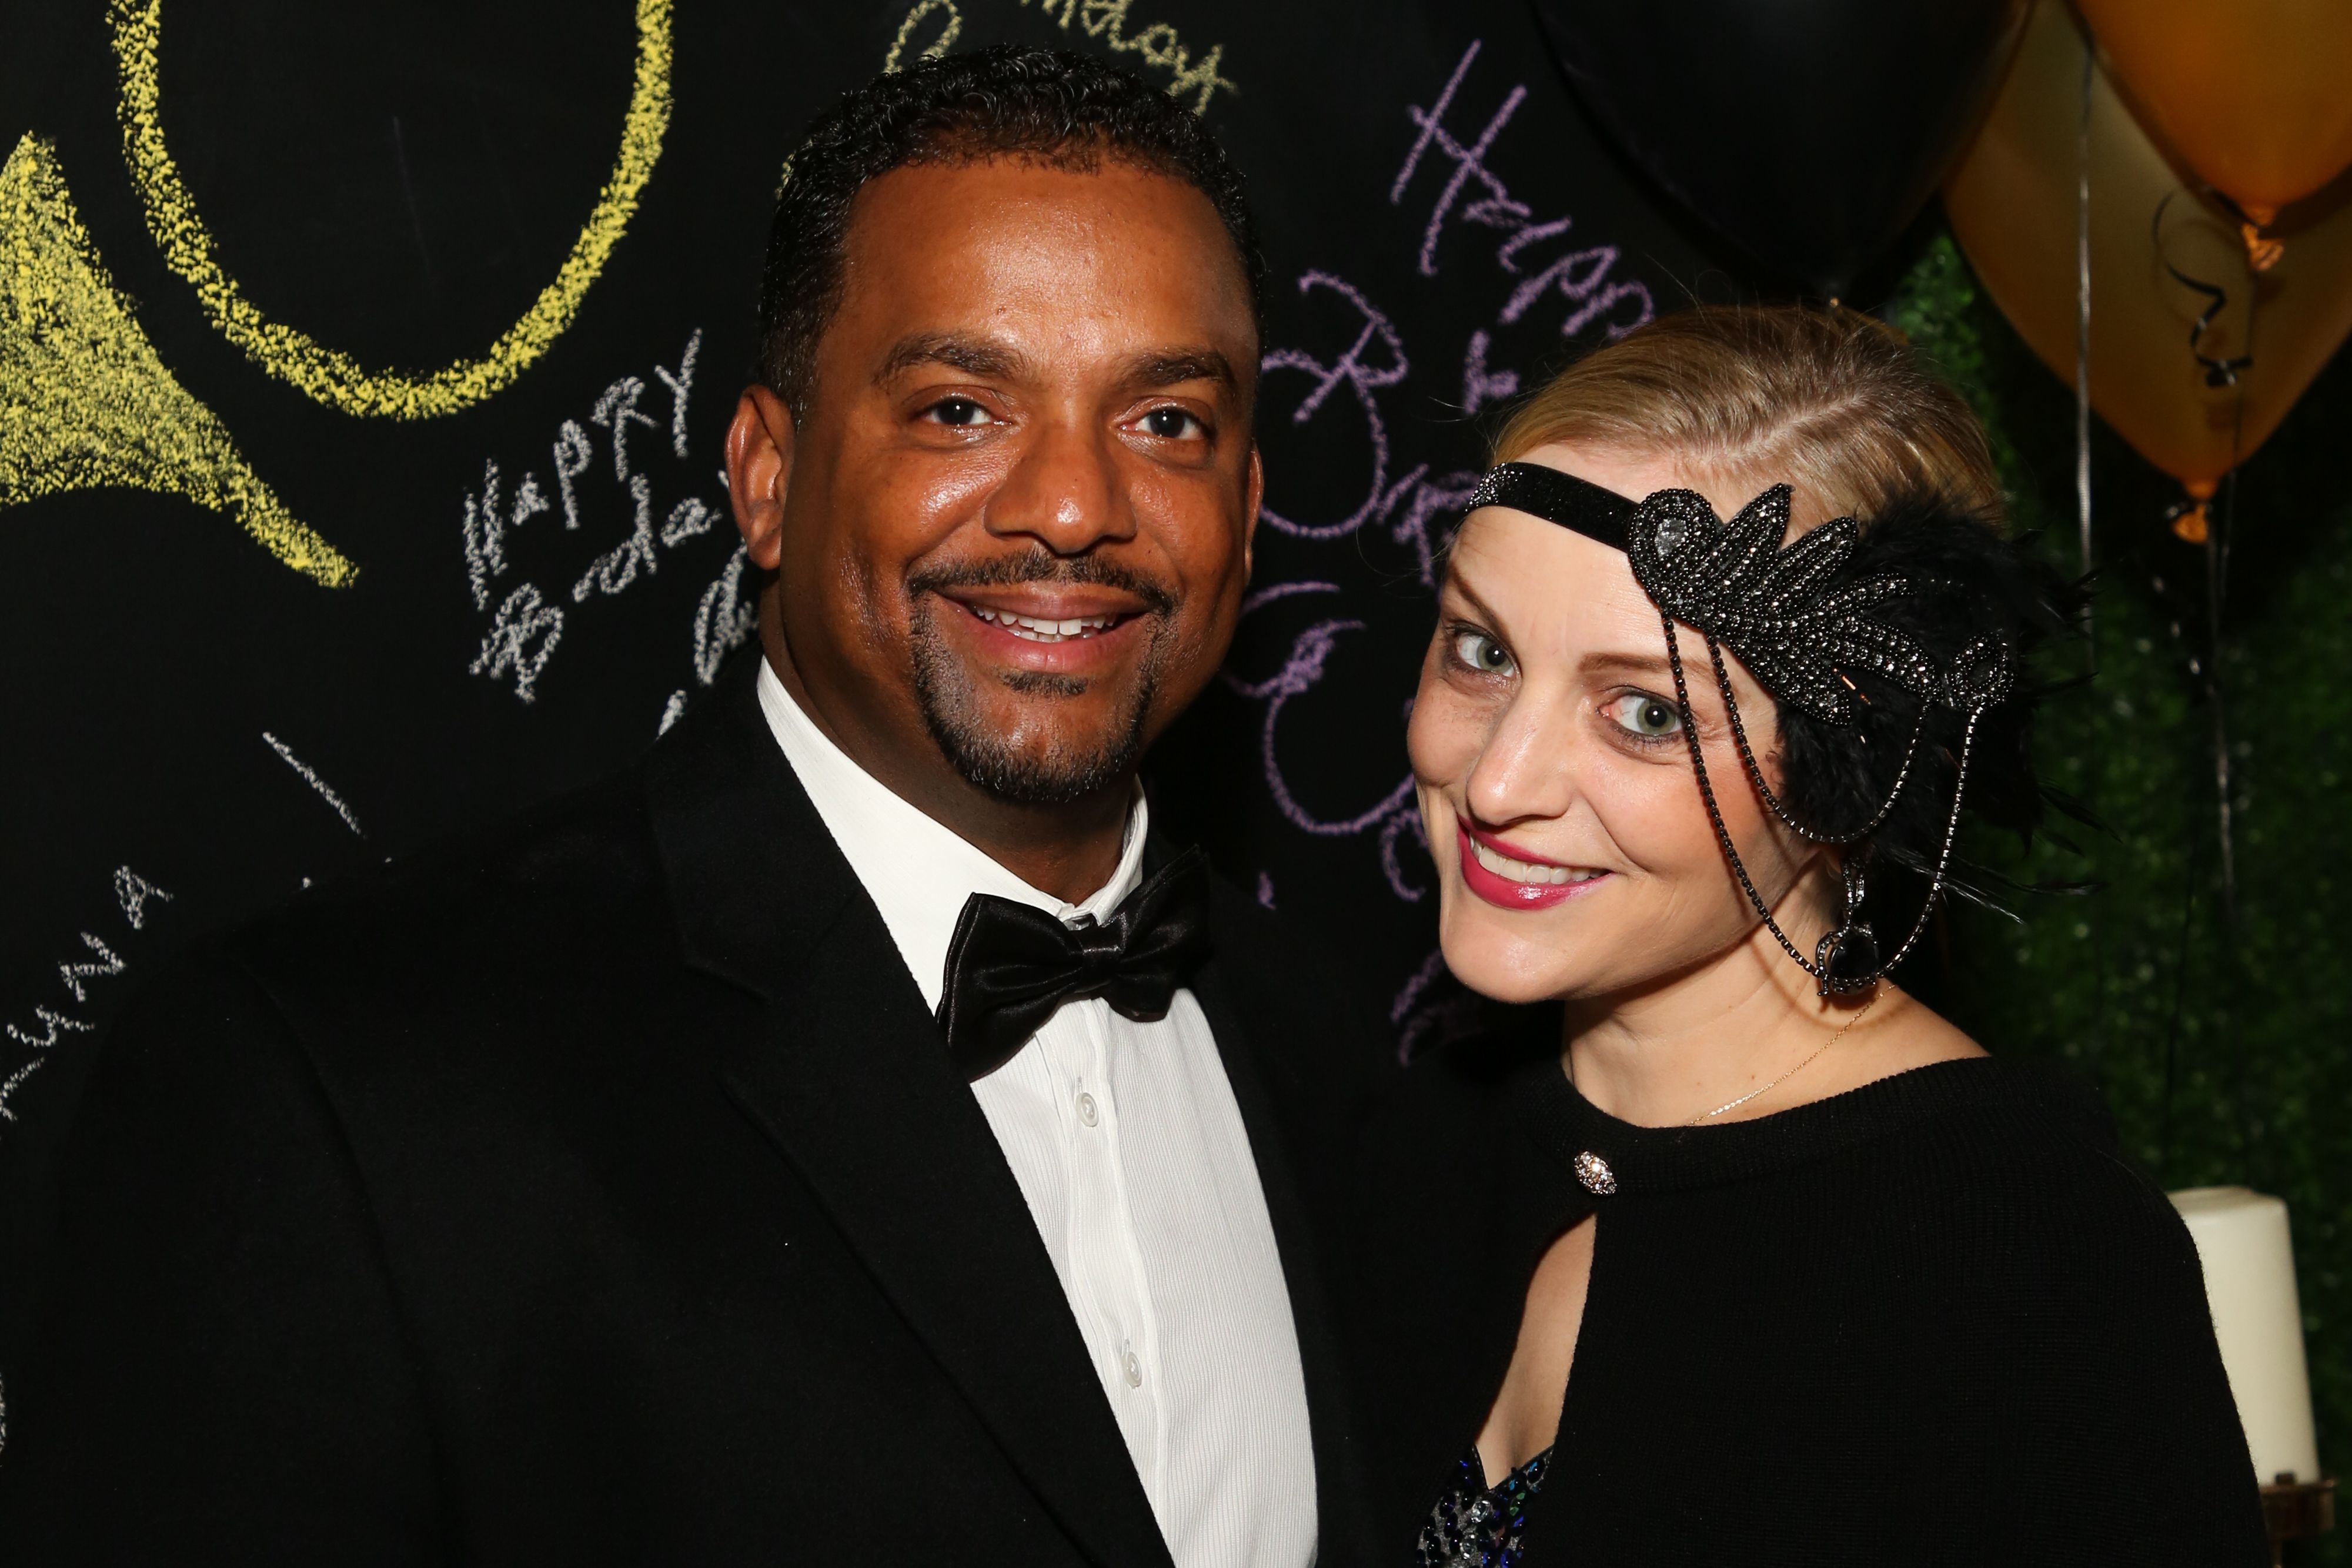 Actor Alfonso Ribeiro and his wife Angela Unkrich attend the birthday celebration of Keo Motsepe on November 30, 2019 in Los Angeles, California | Photo: Getty Images